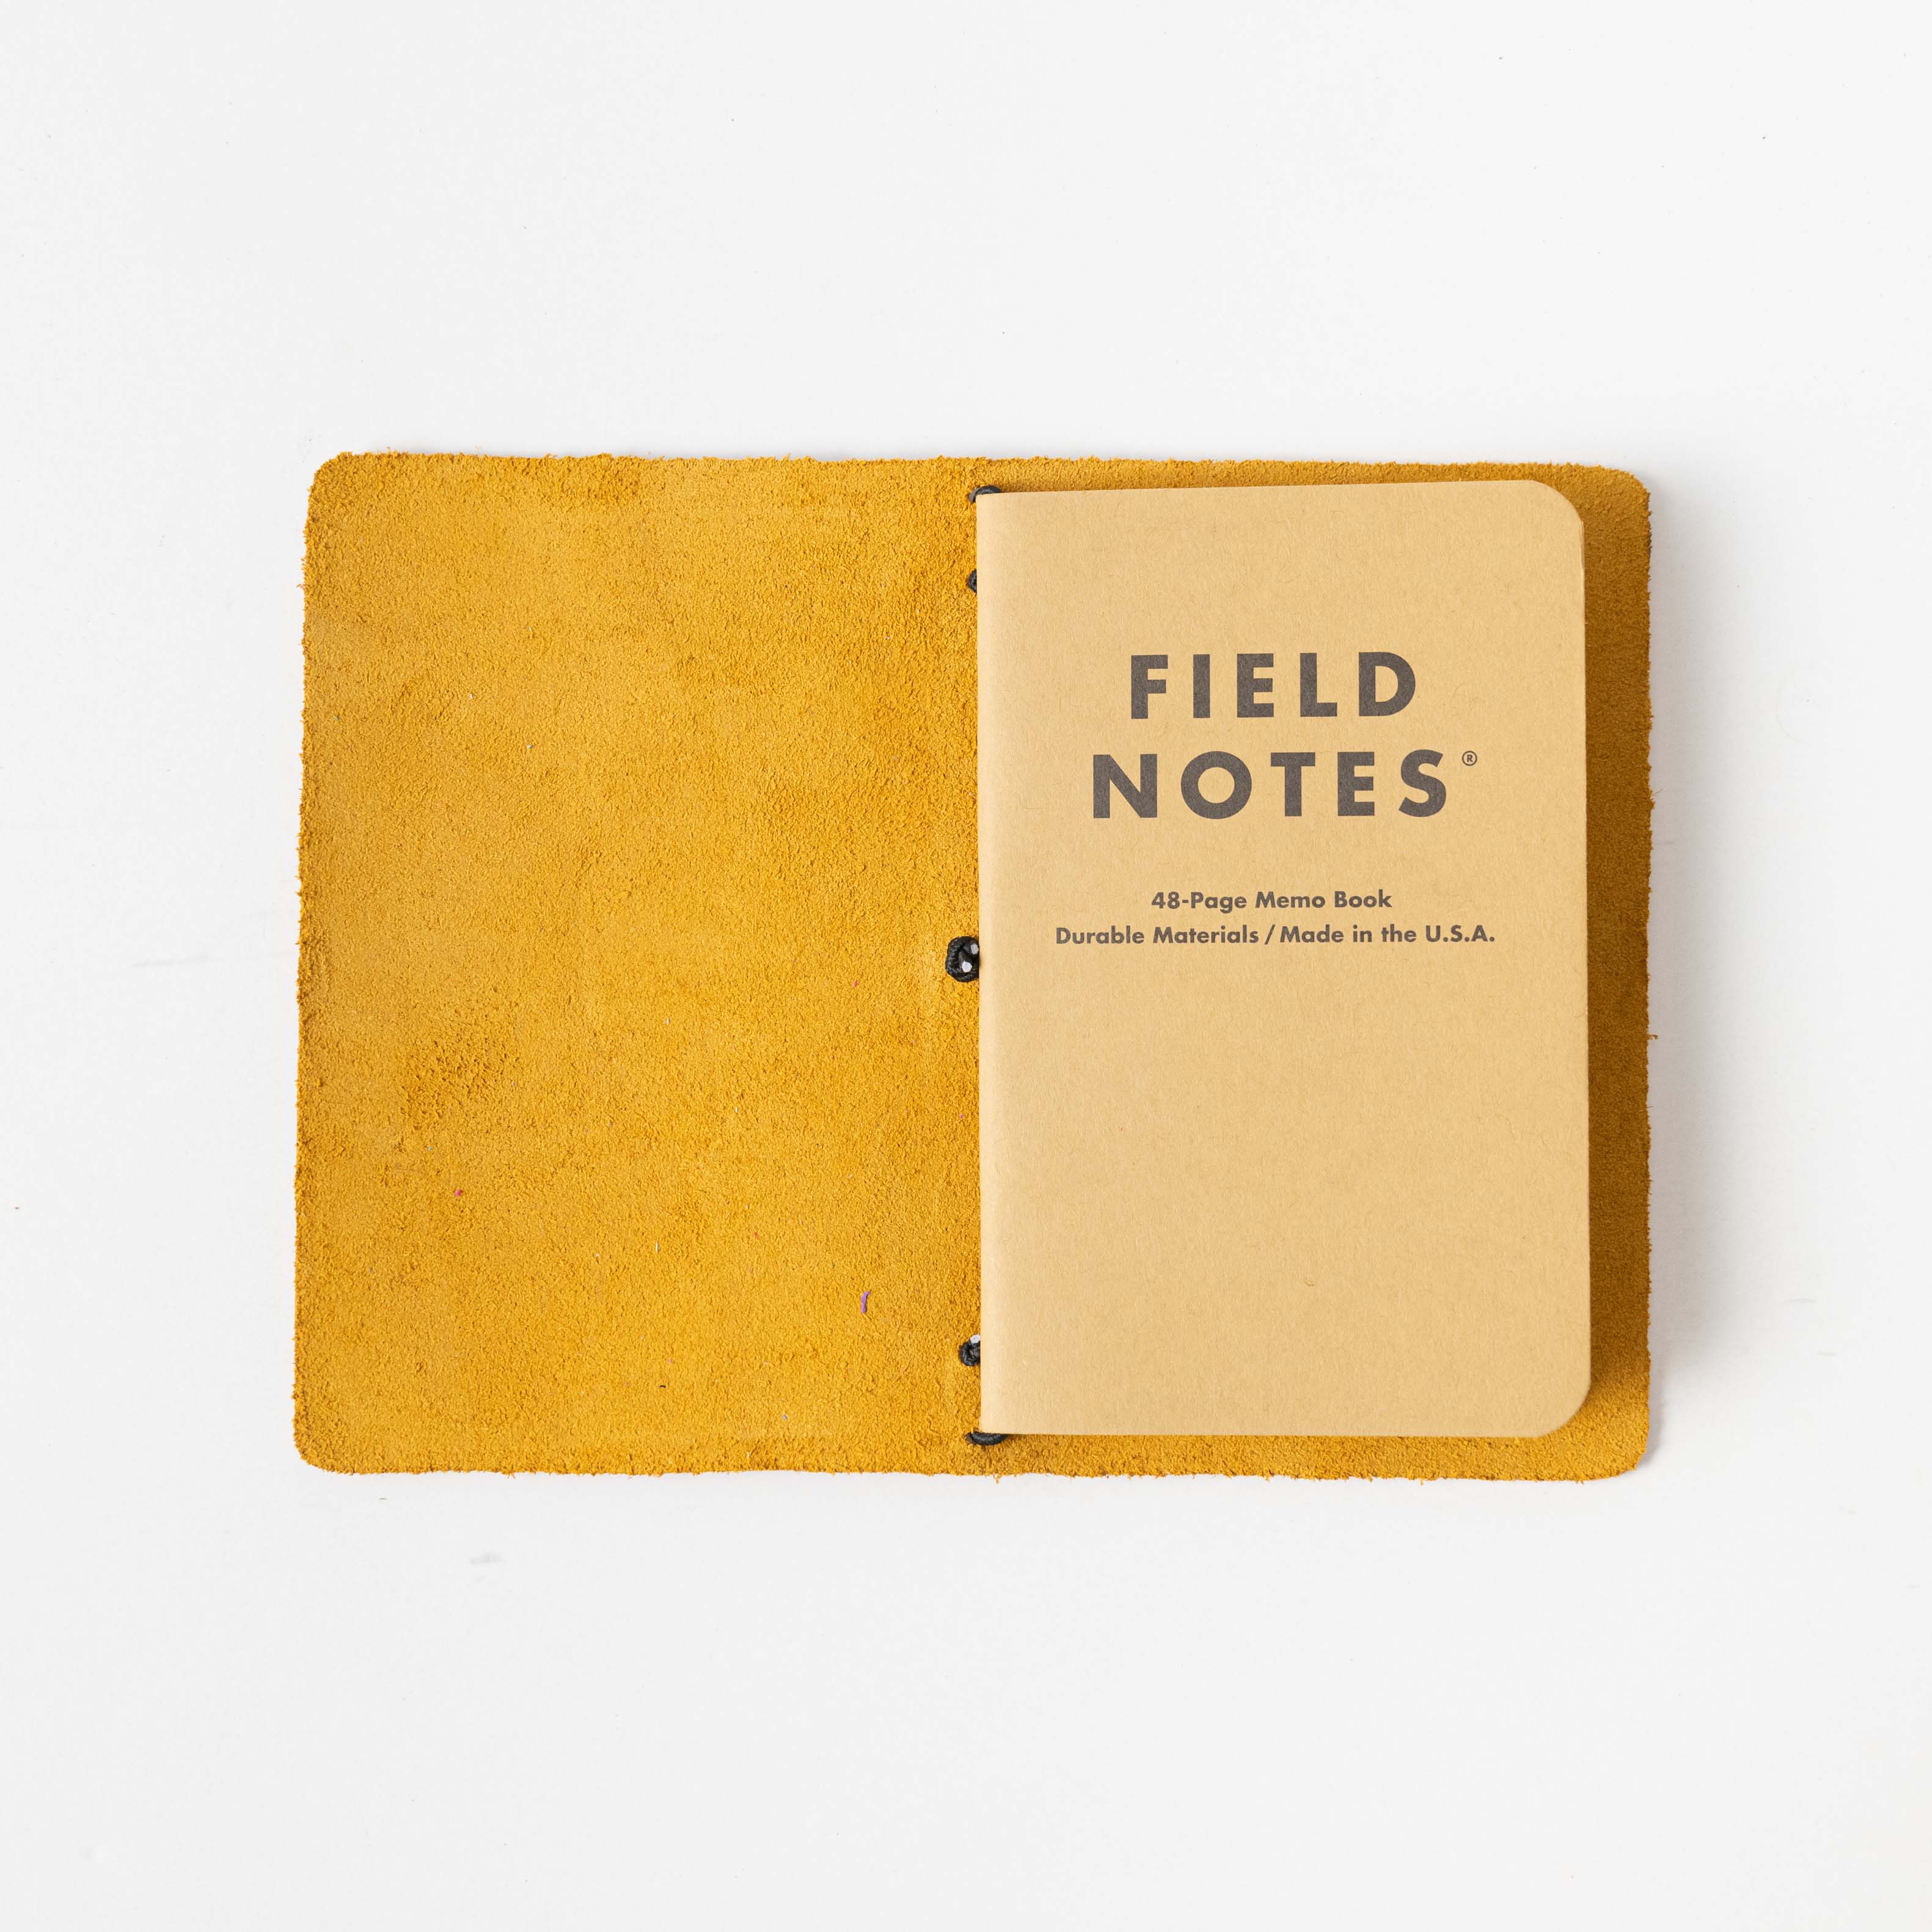 Mustard Travel Notebook- leather journal - leather notebook - KMM &amp; Co.